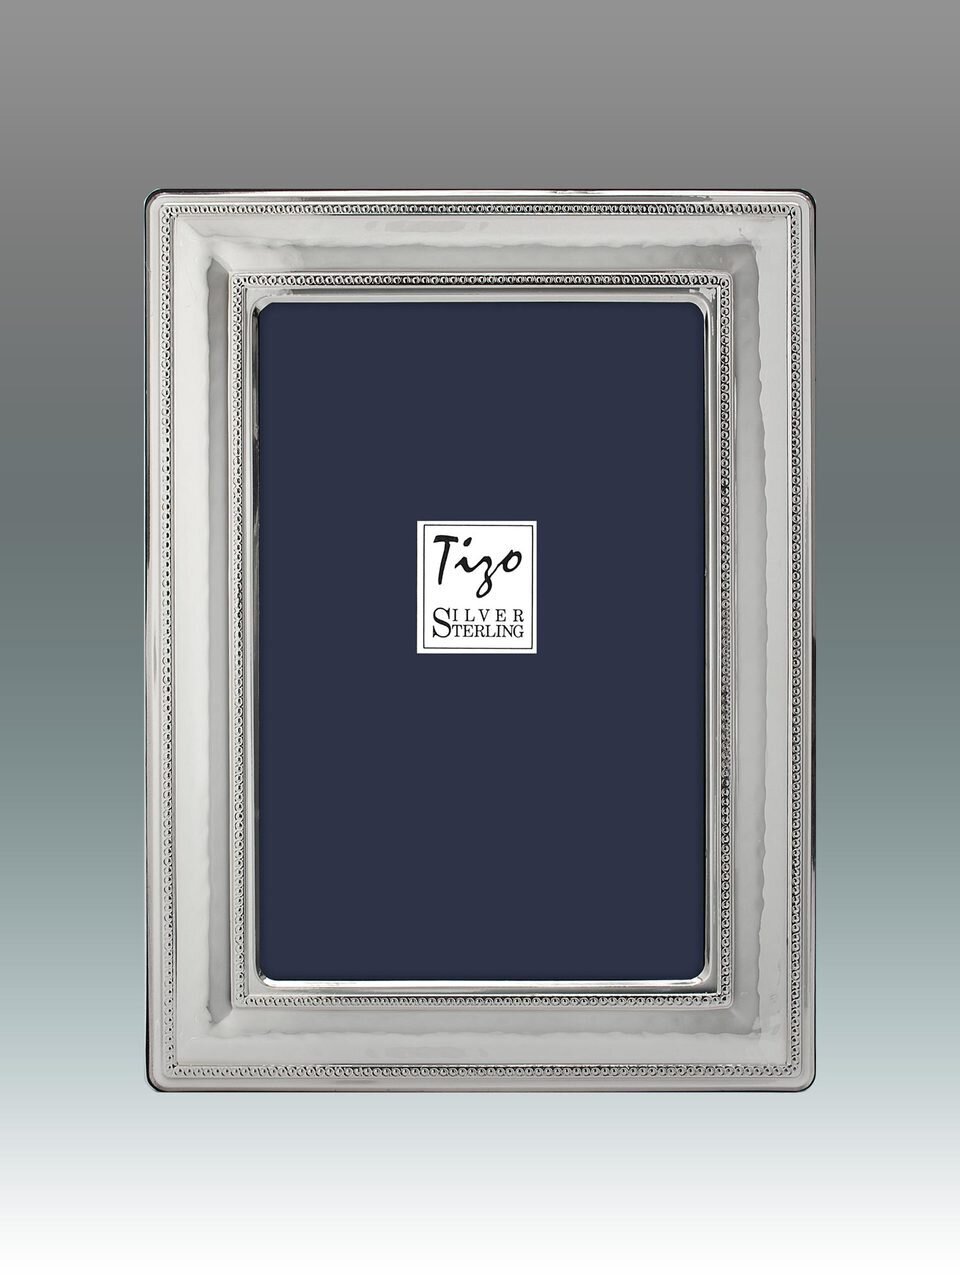 Tizo Pretty Beads 4 x 6 Inch Sterling Silver Picture Frame